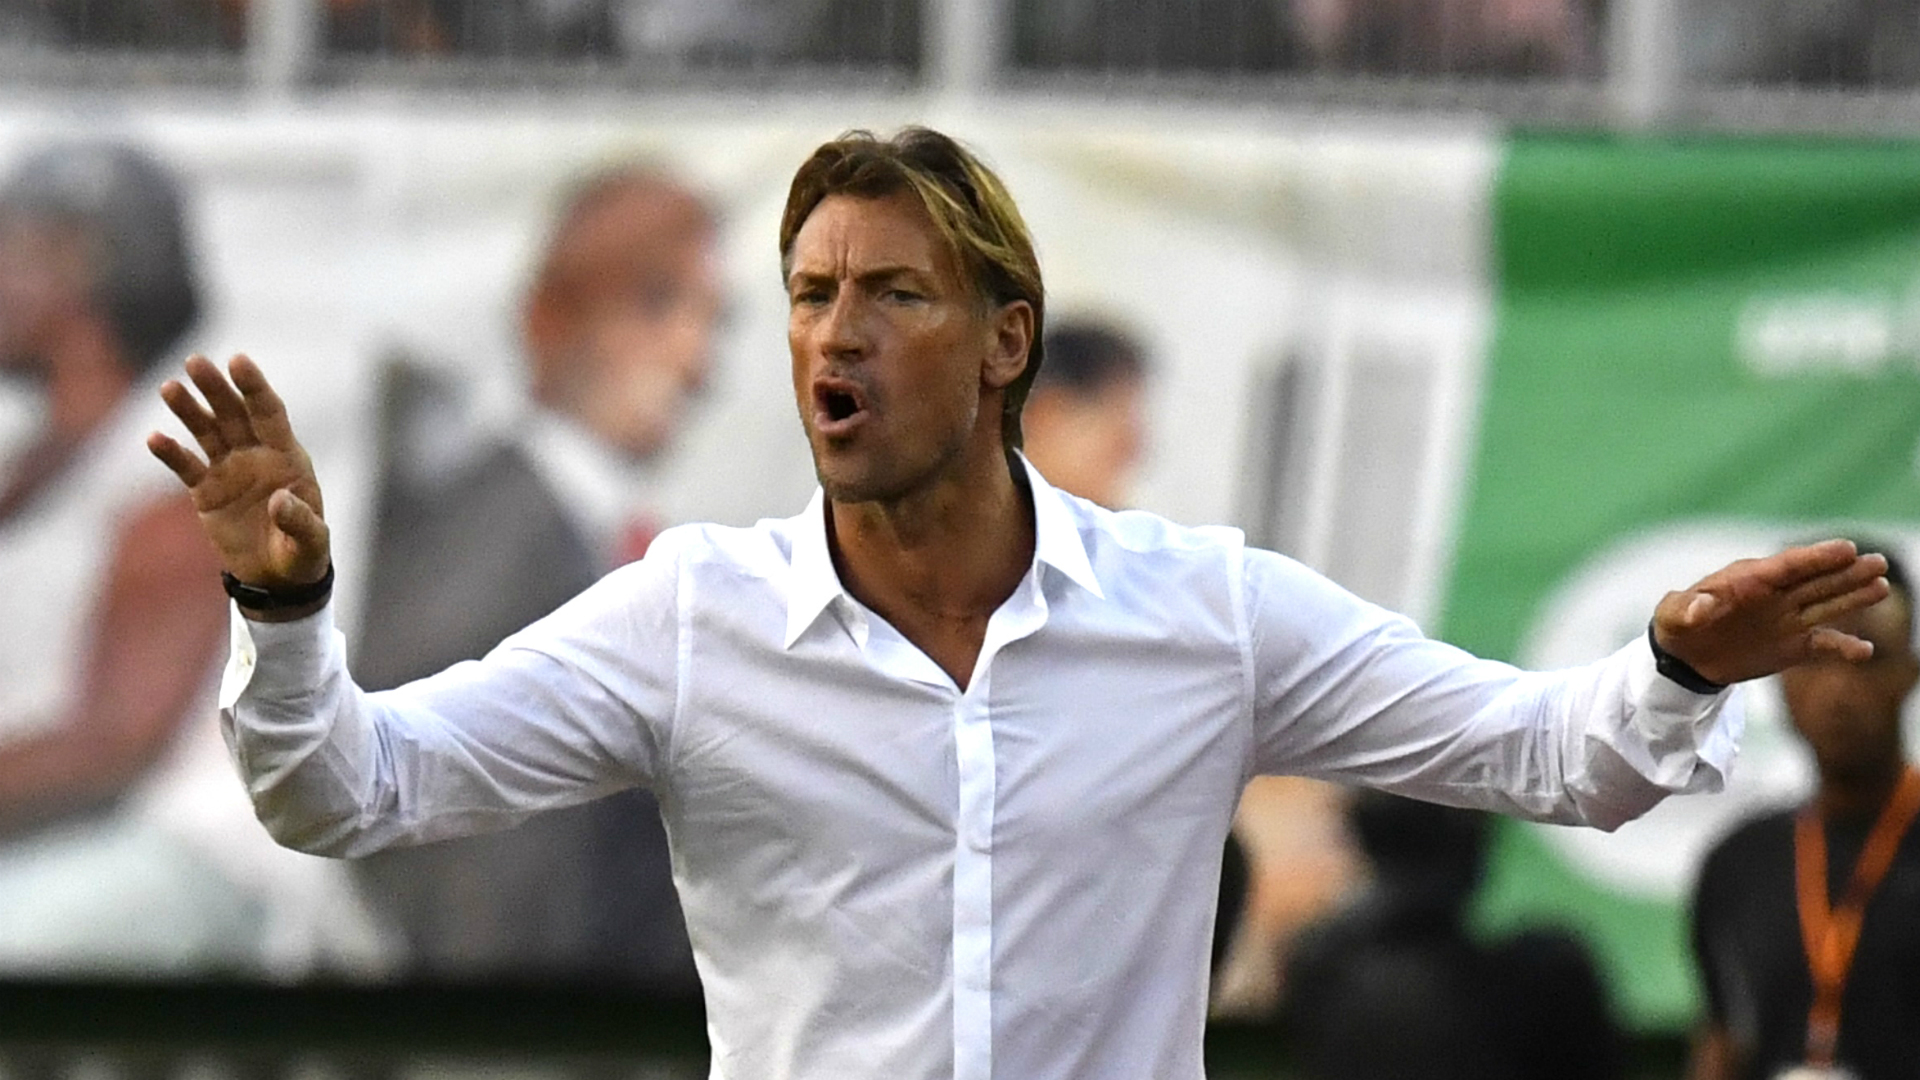 Afcon 2019: Morocco coach Renard on the importance of winning your group